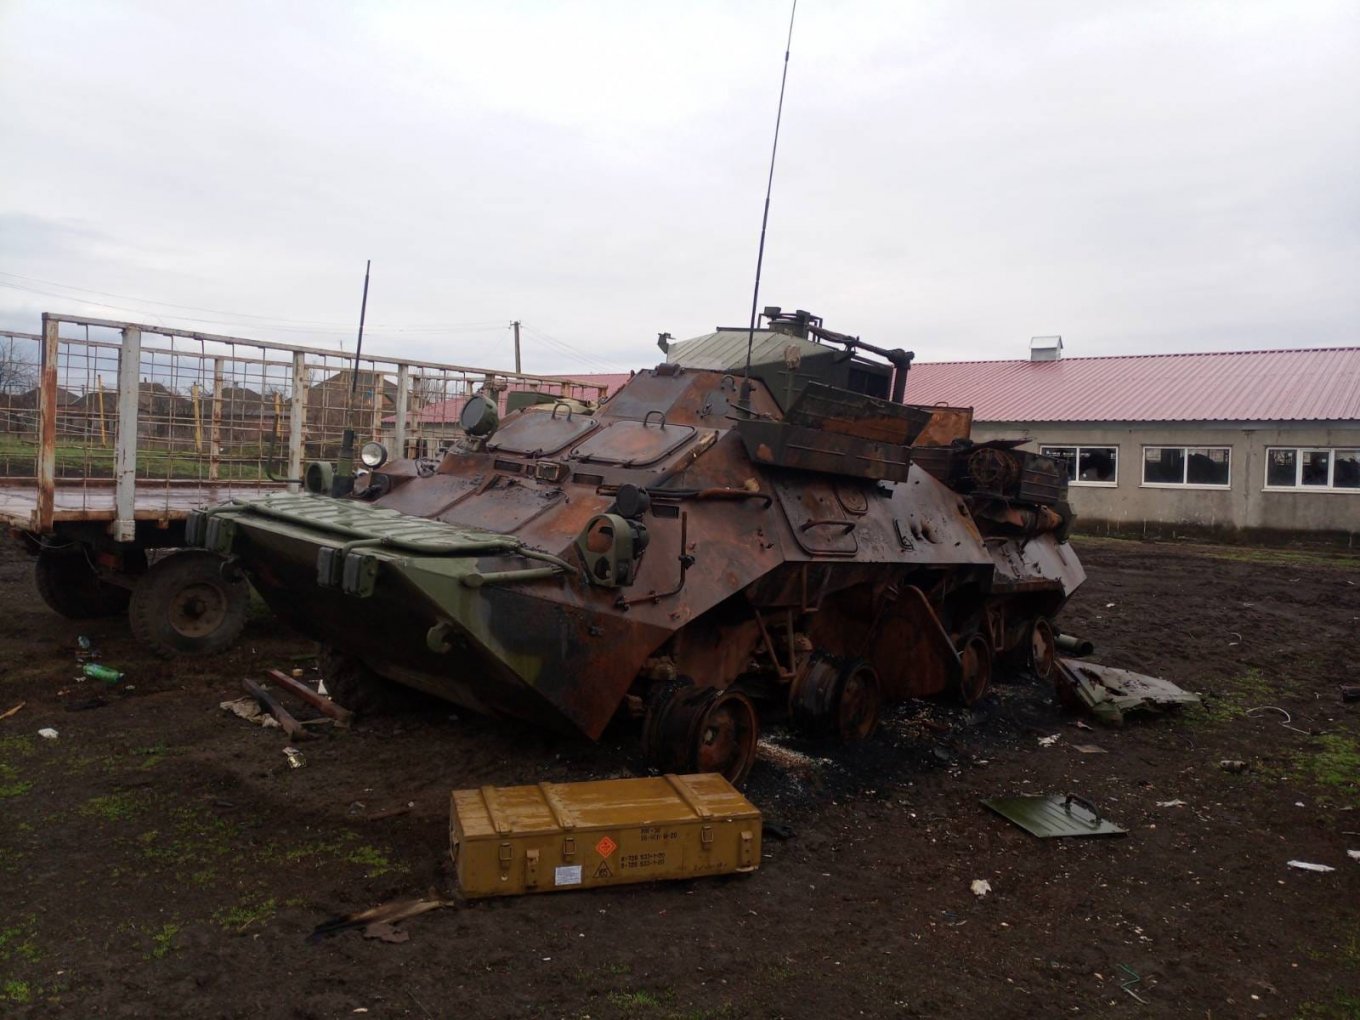 One of the destroyed R-149MA1 vehicles that make part of the Russian Sozvezdie automated command and control system, Russian Command Post Wiped out, Defense Express